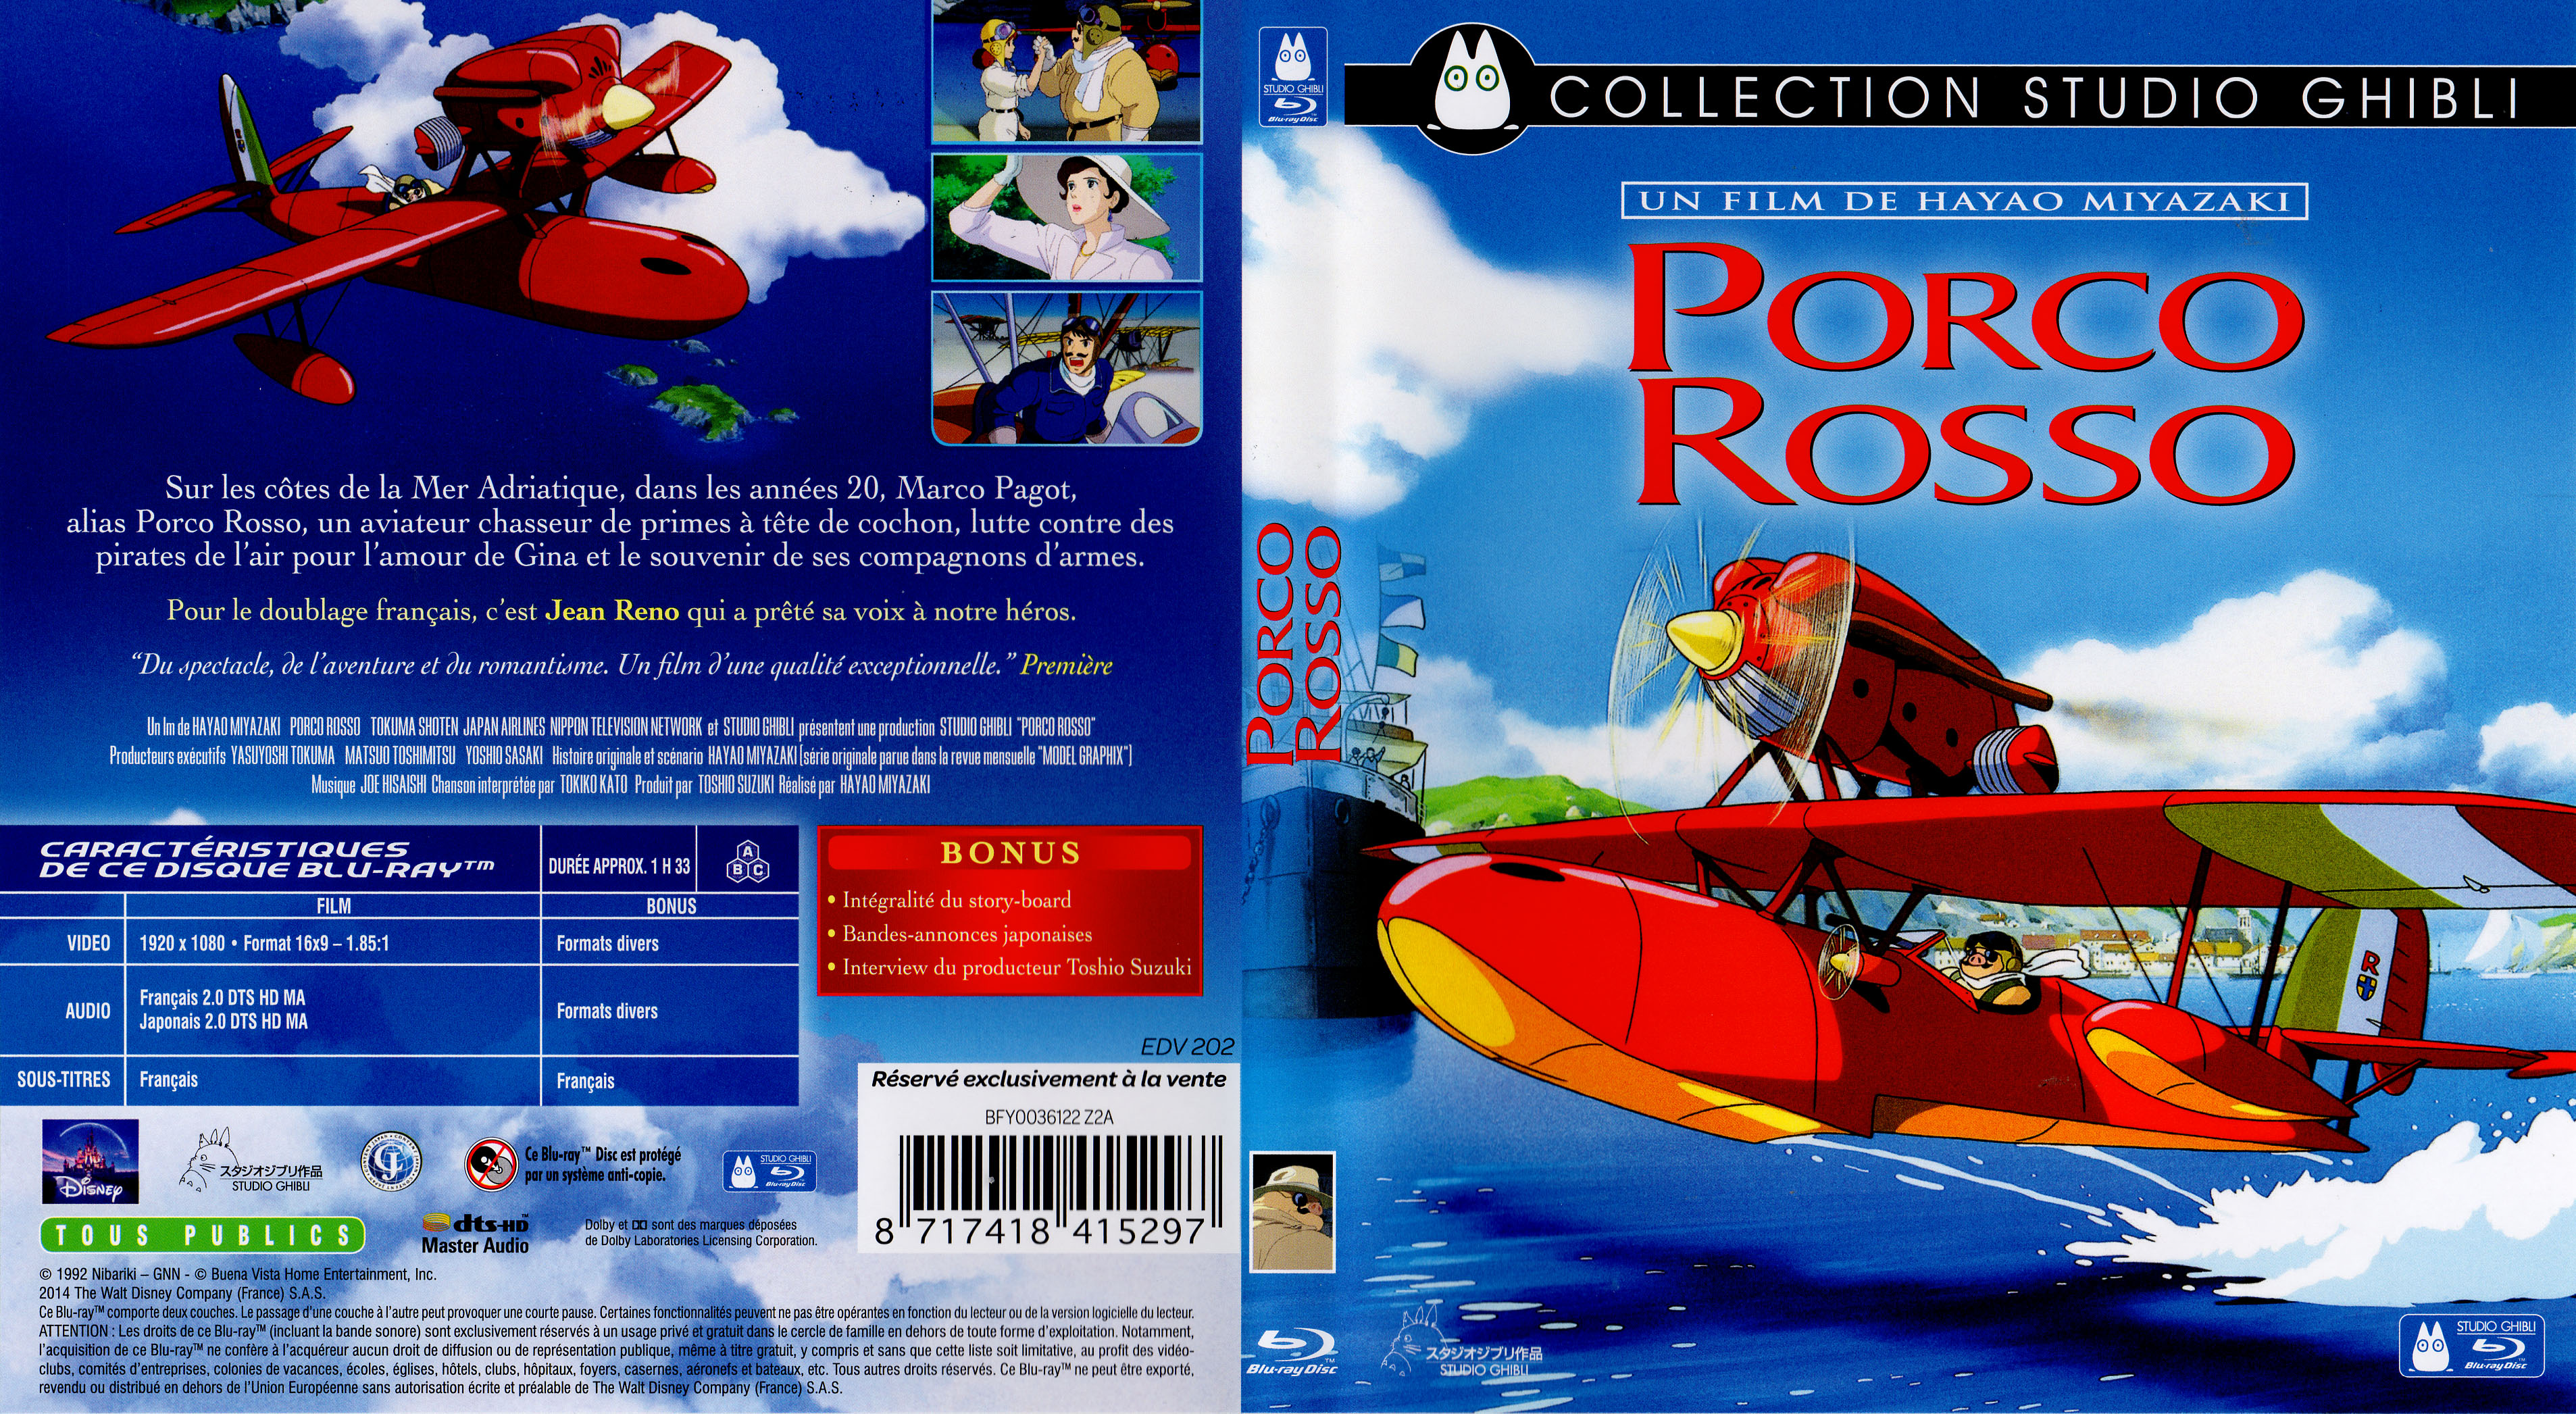 Jaquette DVD Porco Rosso (BLU-RAY)